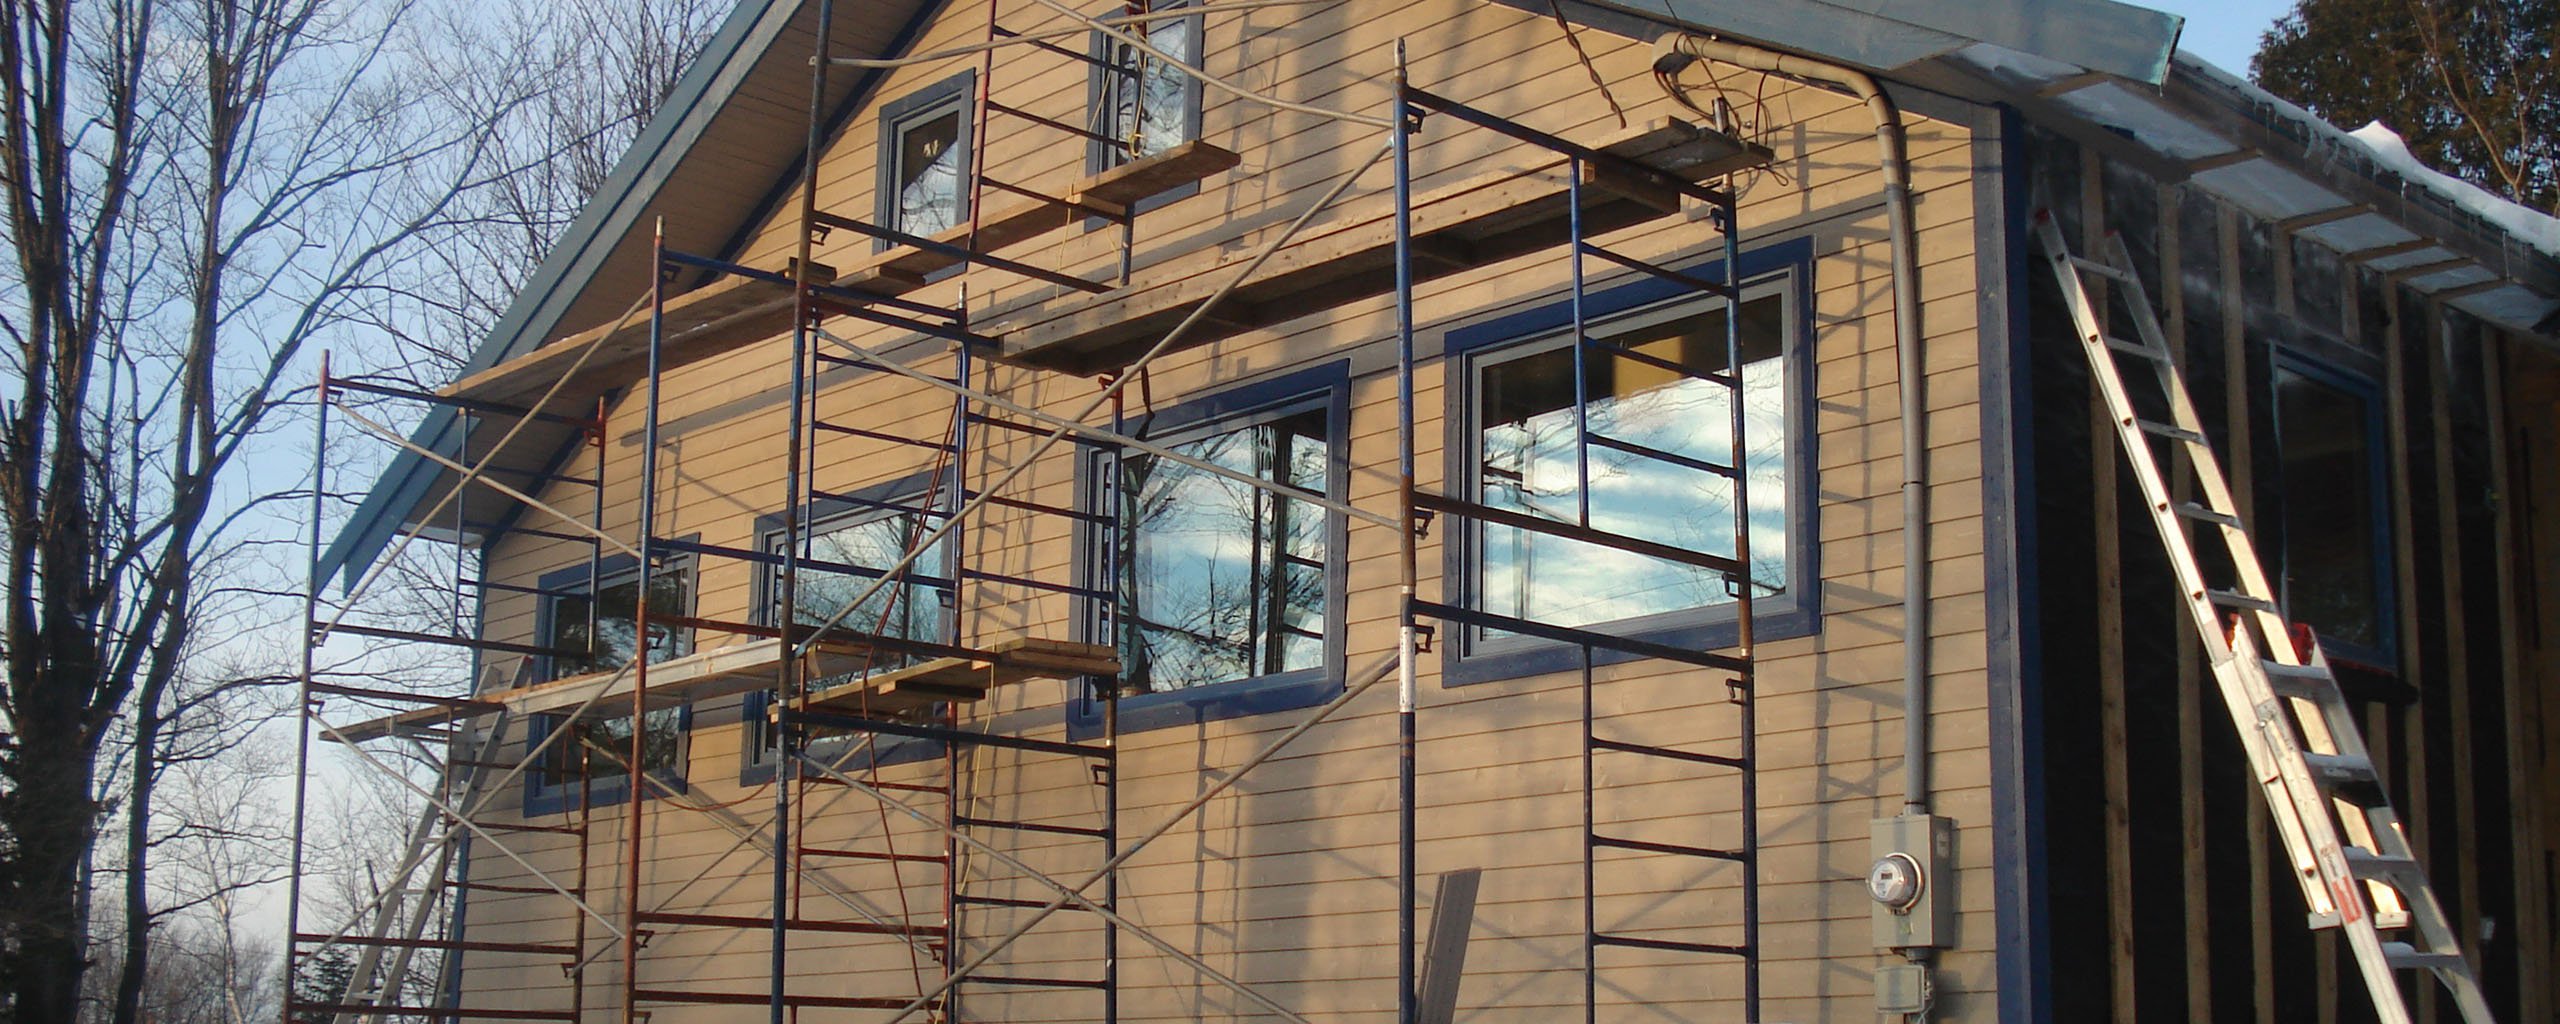 How To Install Siding So Walls Can Dry Ecohome